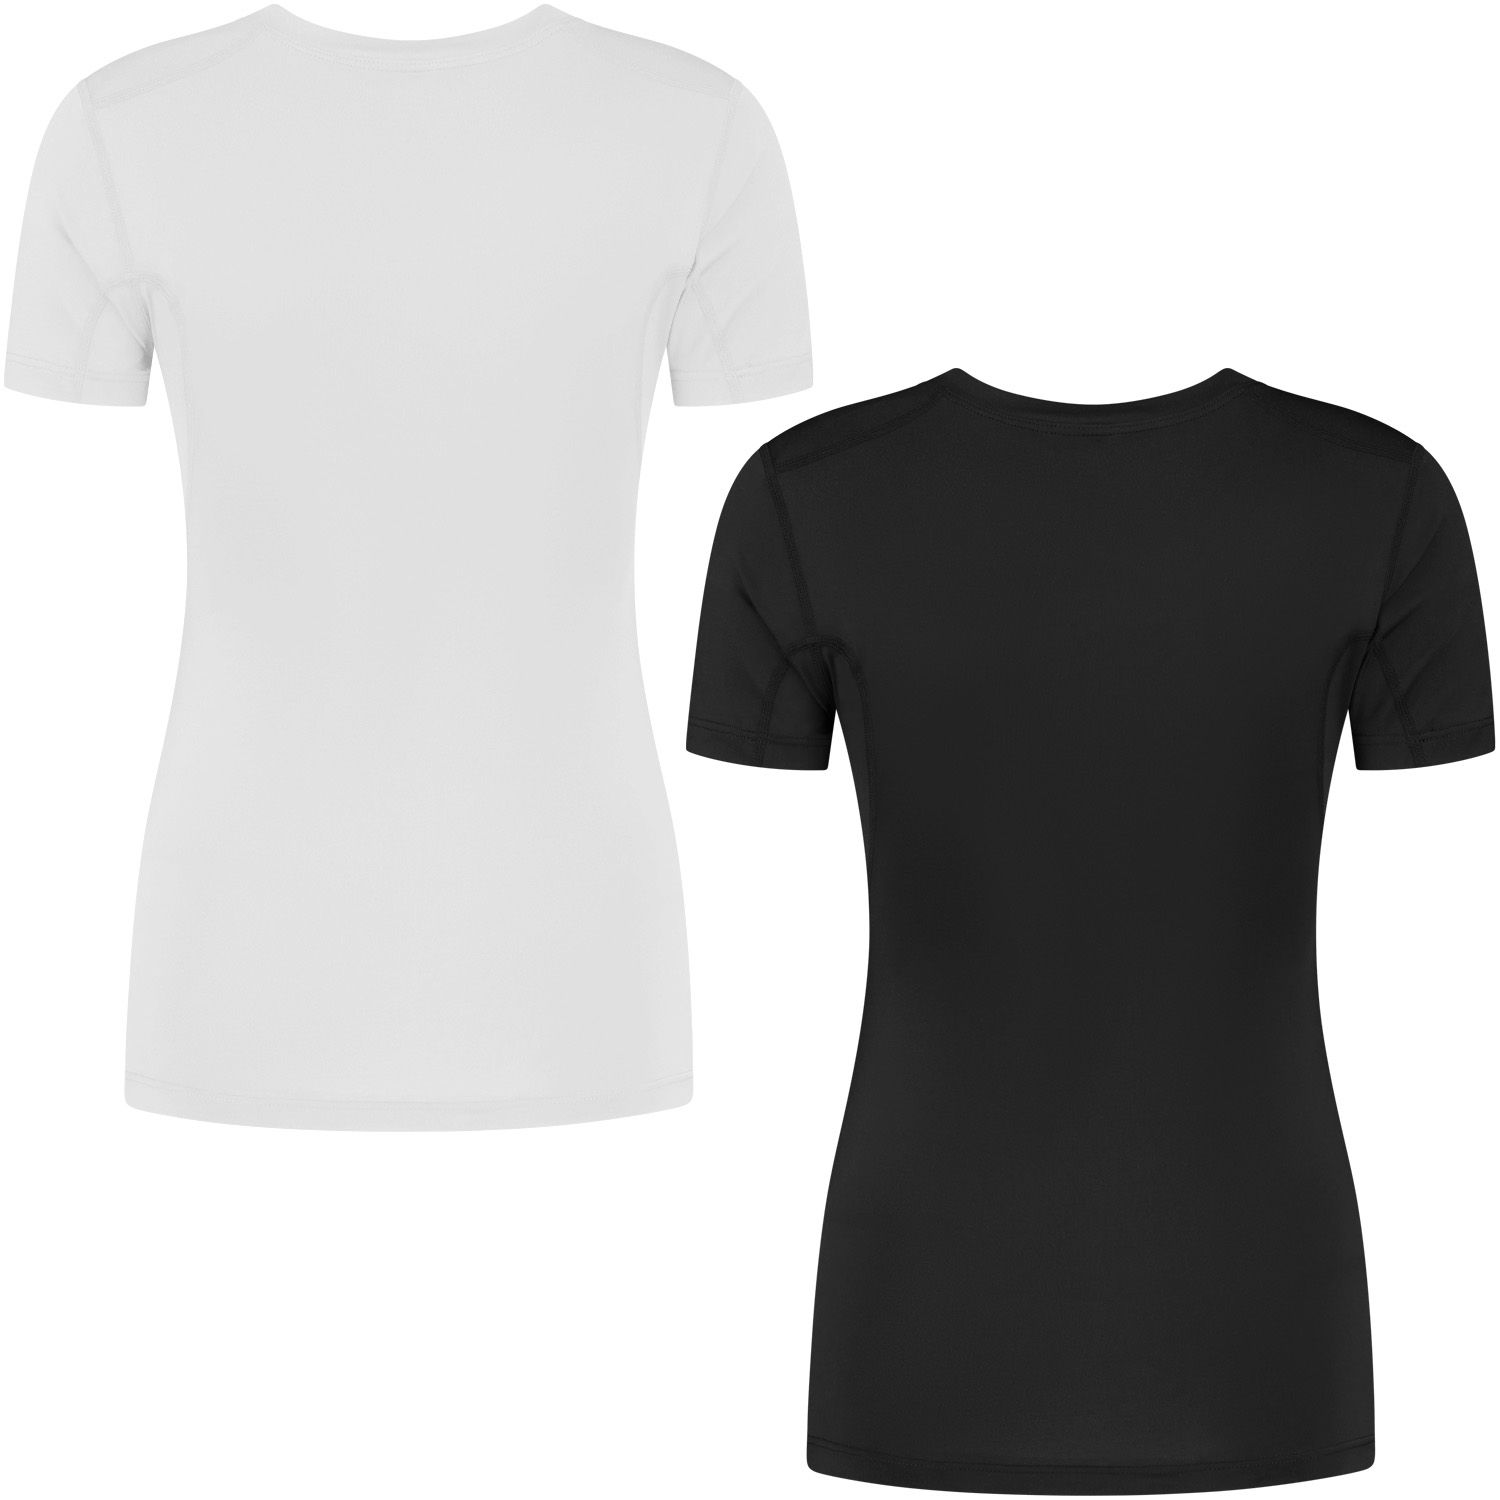 gladiator sports compression shirt for women in black and white back view